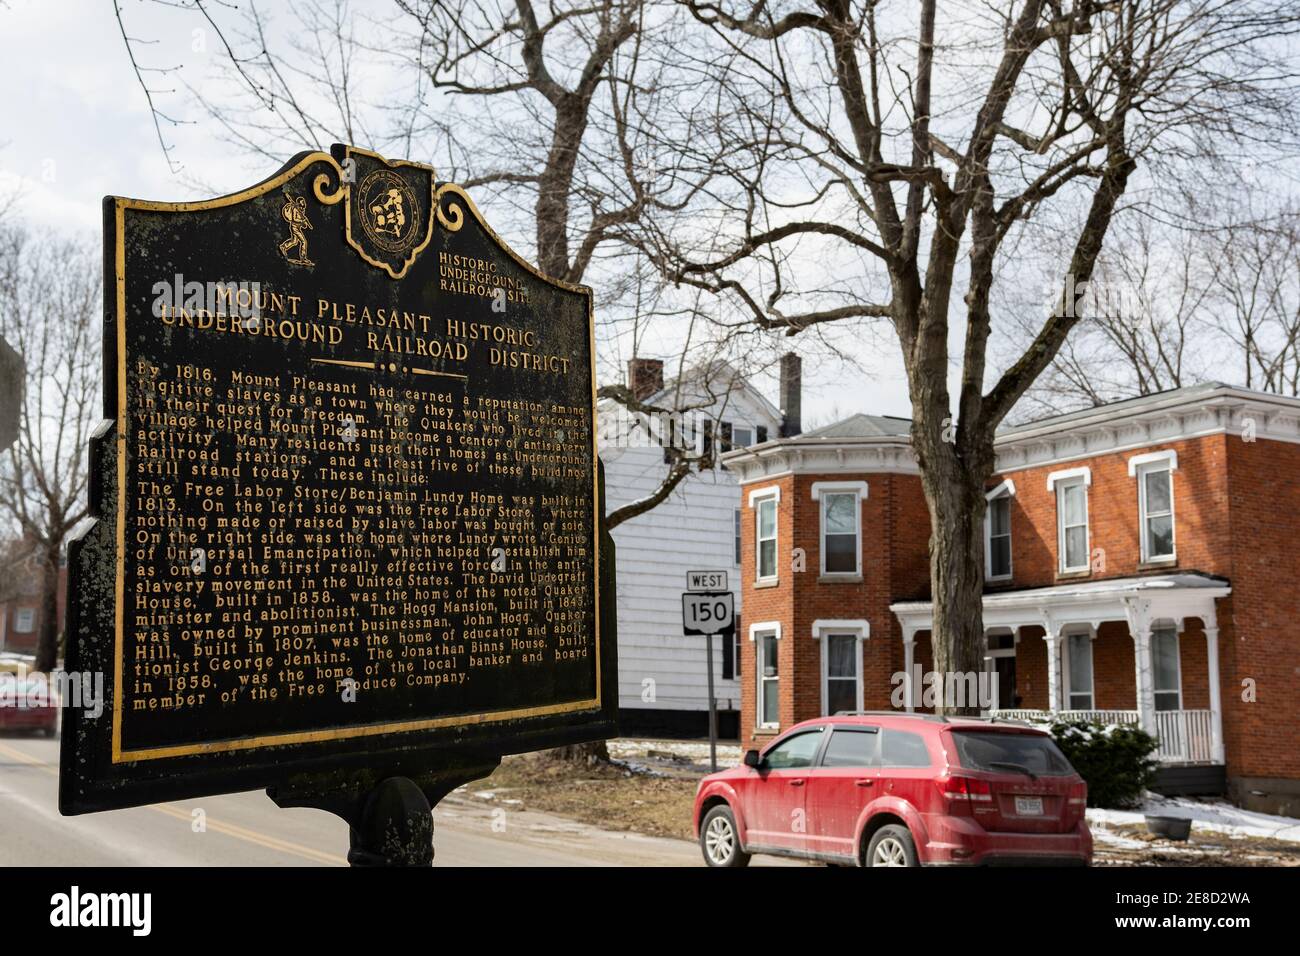 Mount Pleasant, Ohio/USA- March 7, 2019: Historical marker denoting the Underground Railroad District in the villiage of Mt. Pleasant, OH established Stock Photo